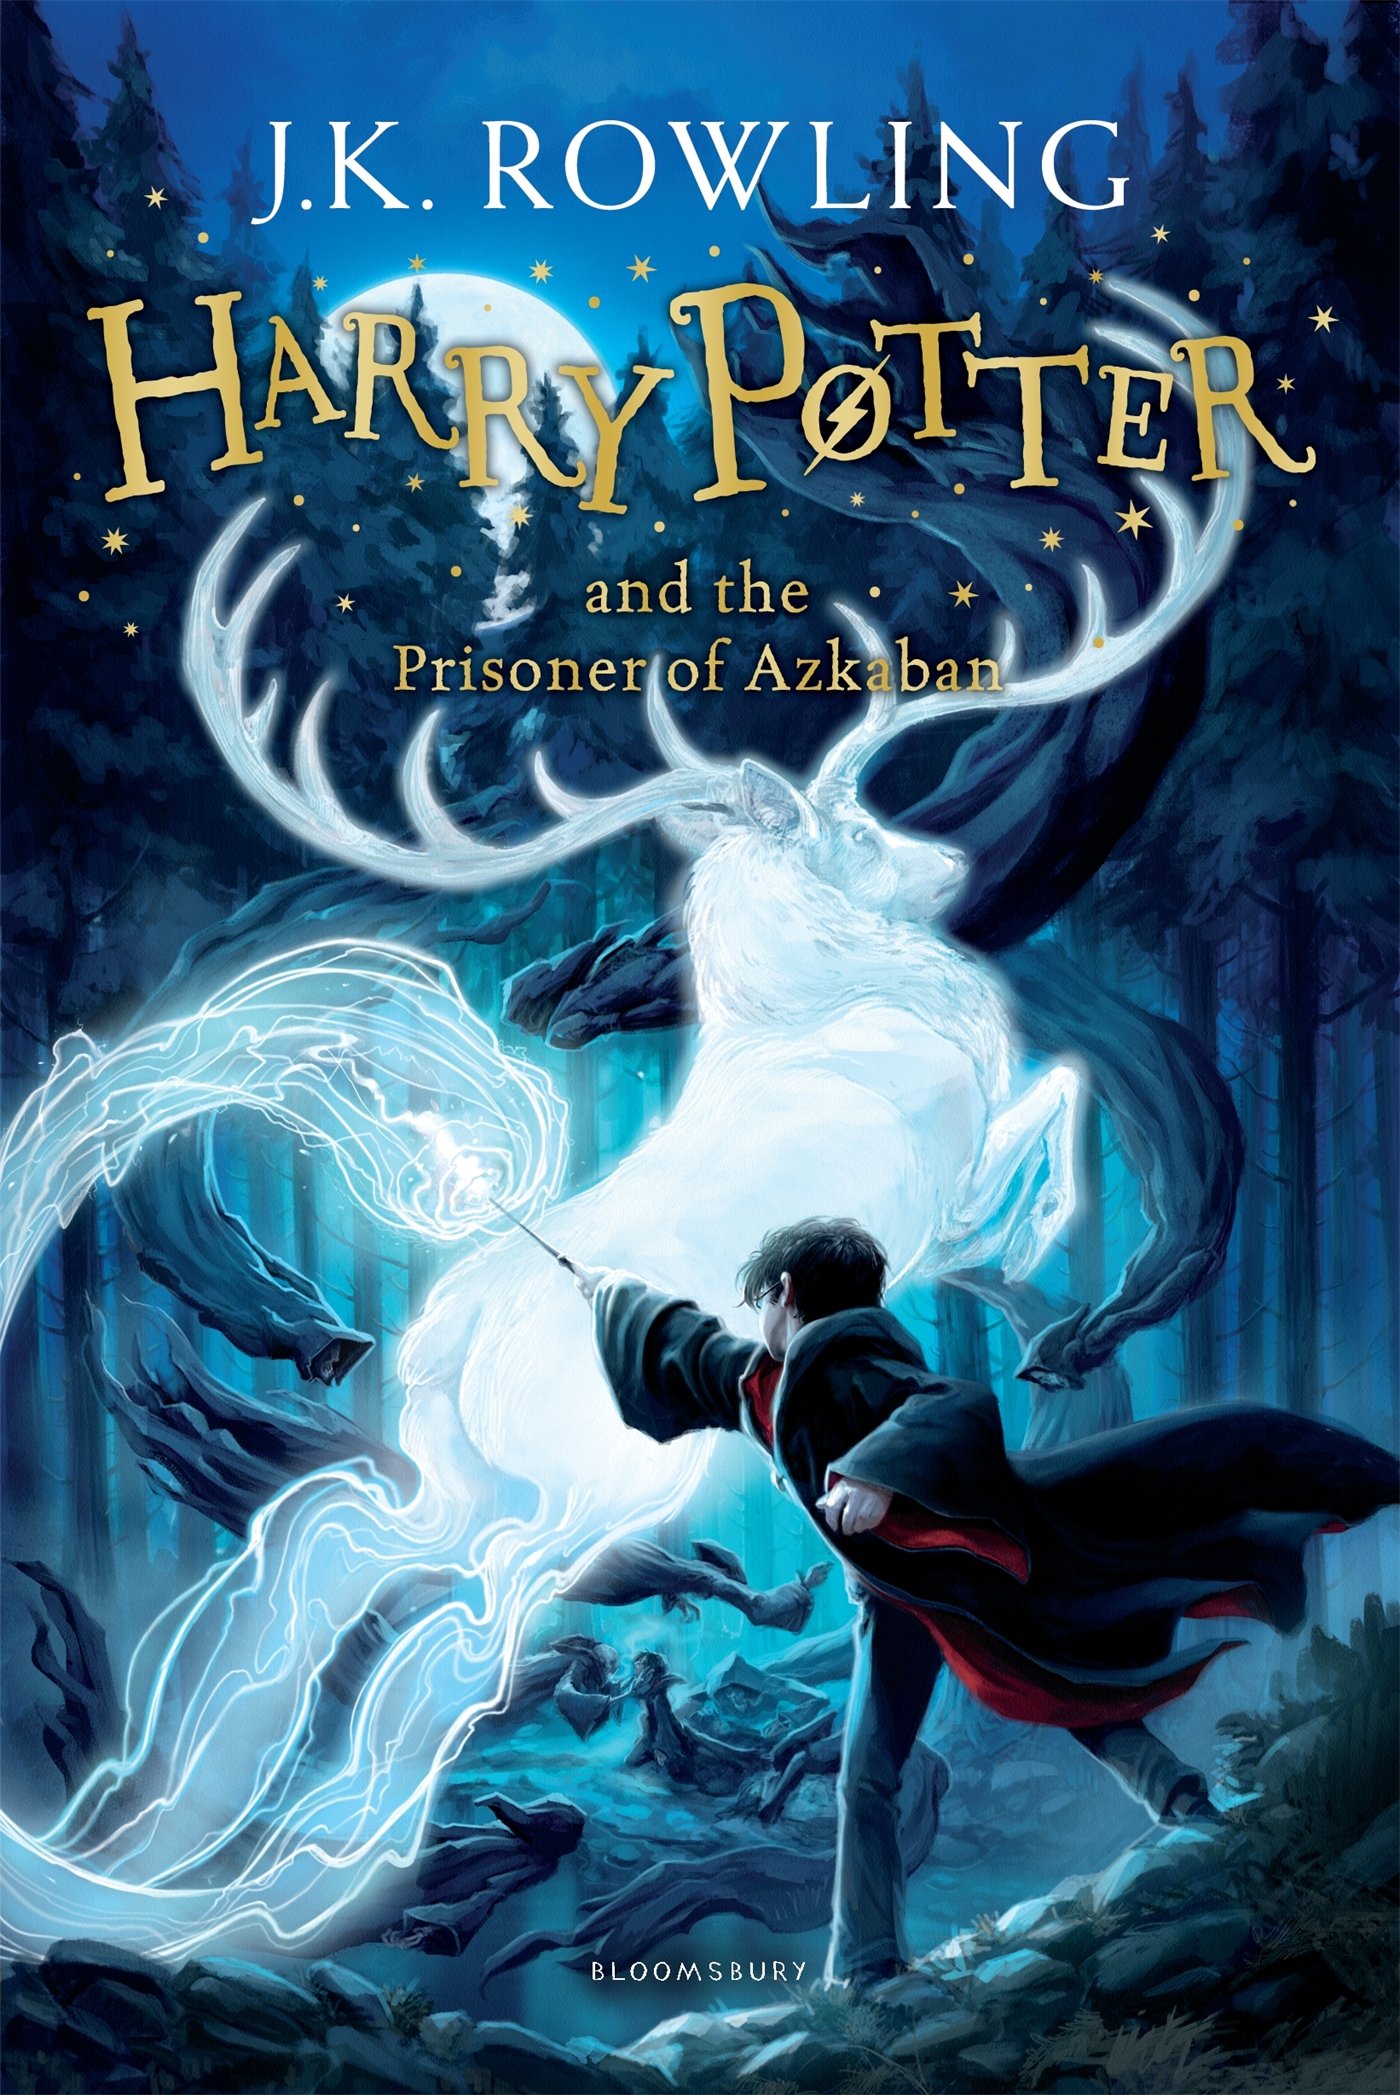 7th harry potter book